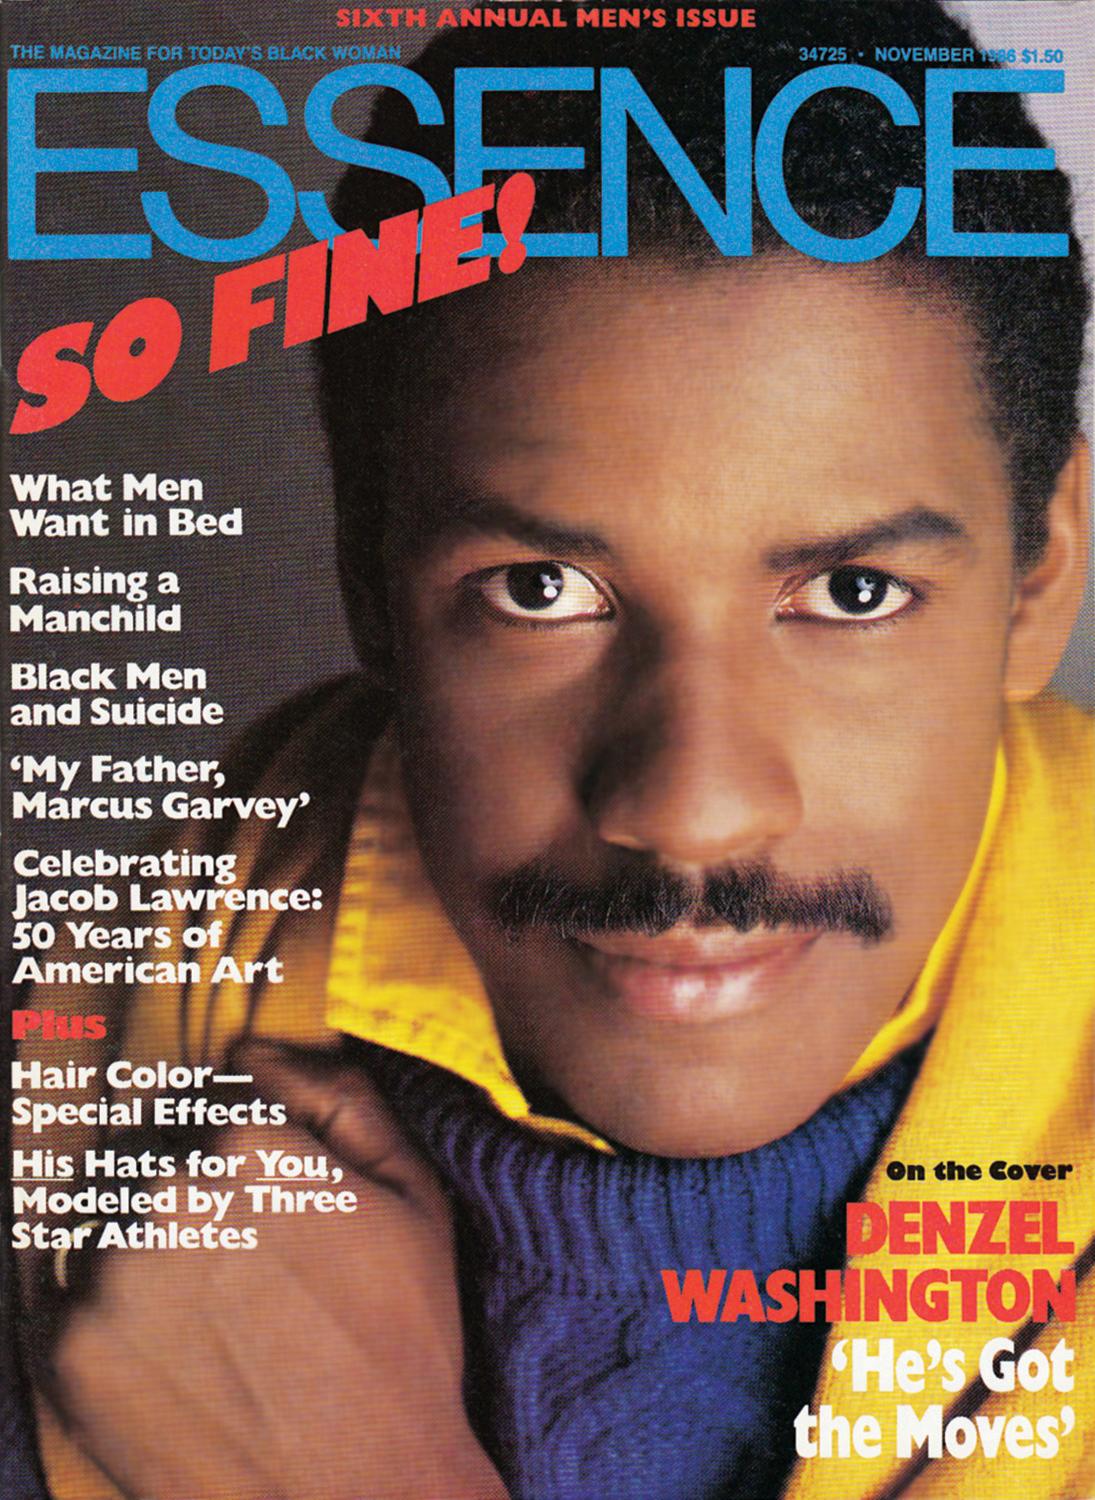 A Look Back At Denzel Washington On The Cover Of ESSENCE Over The Years ...